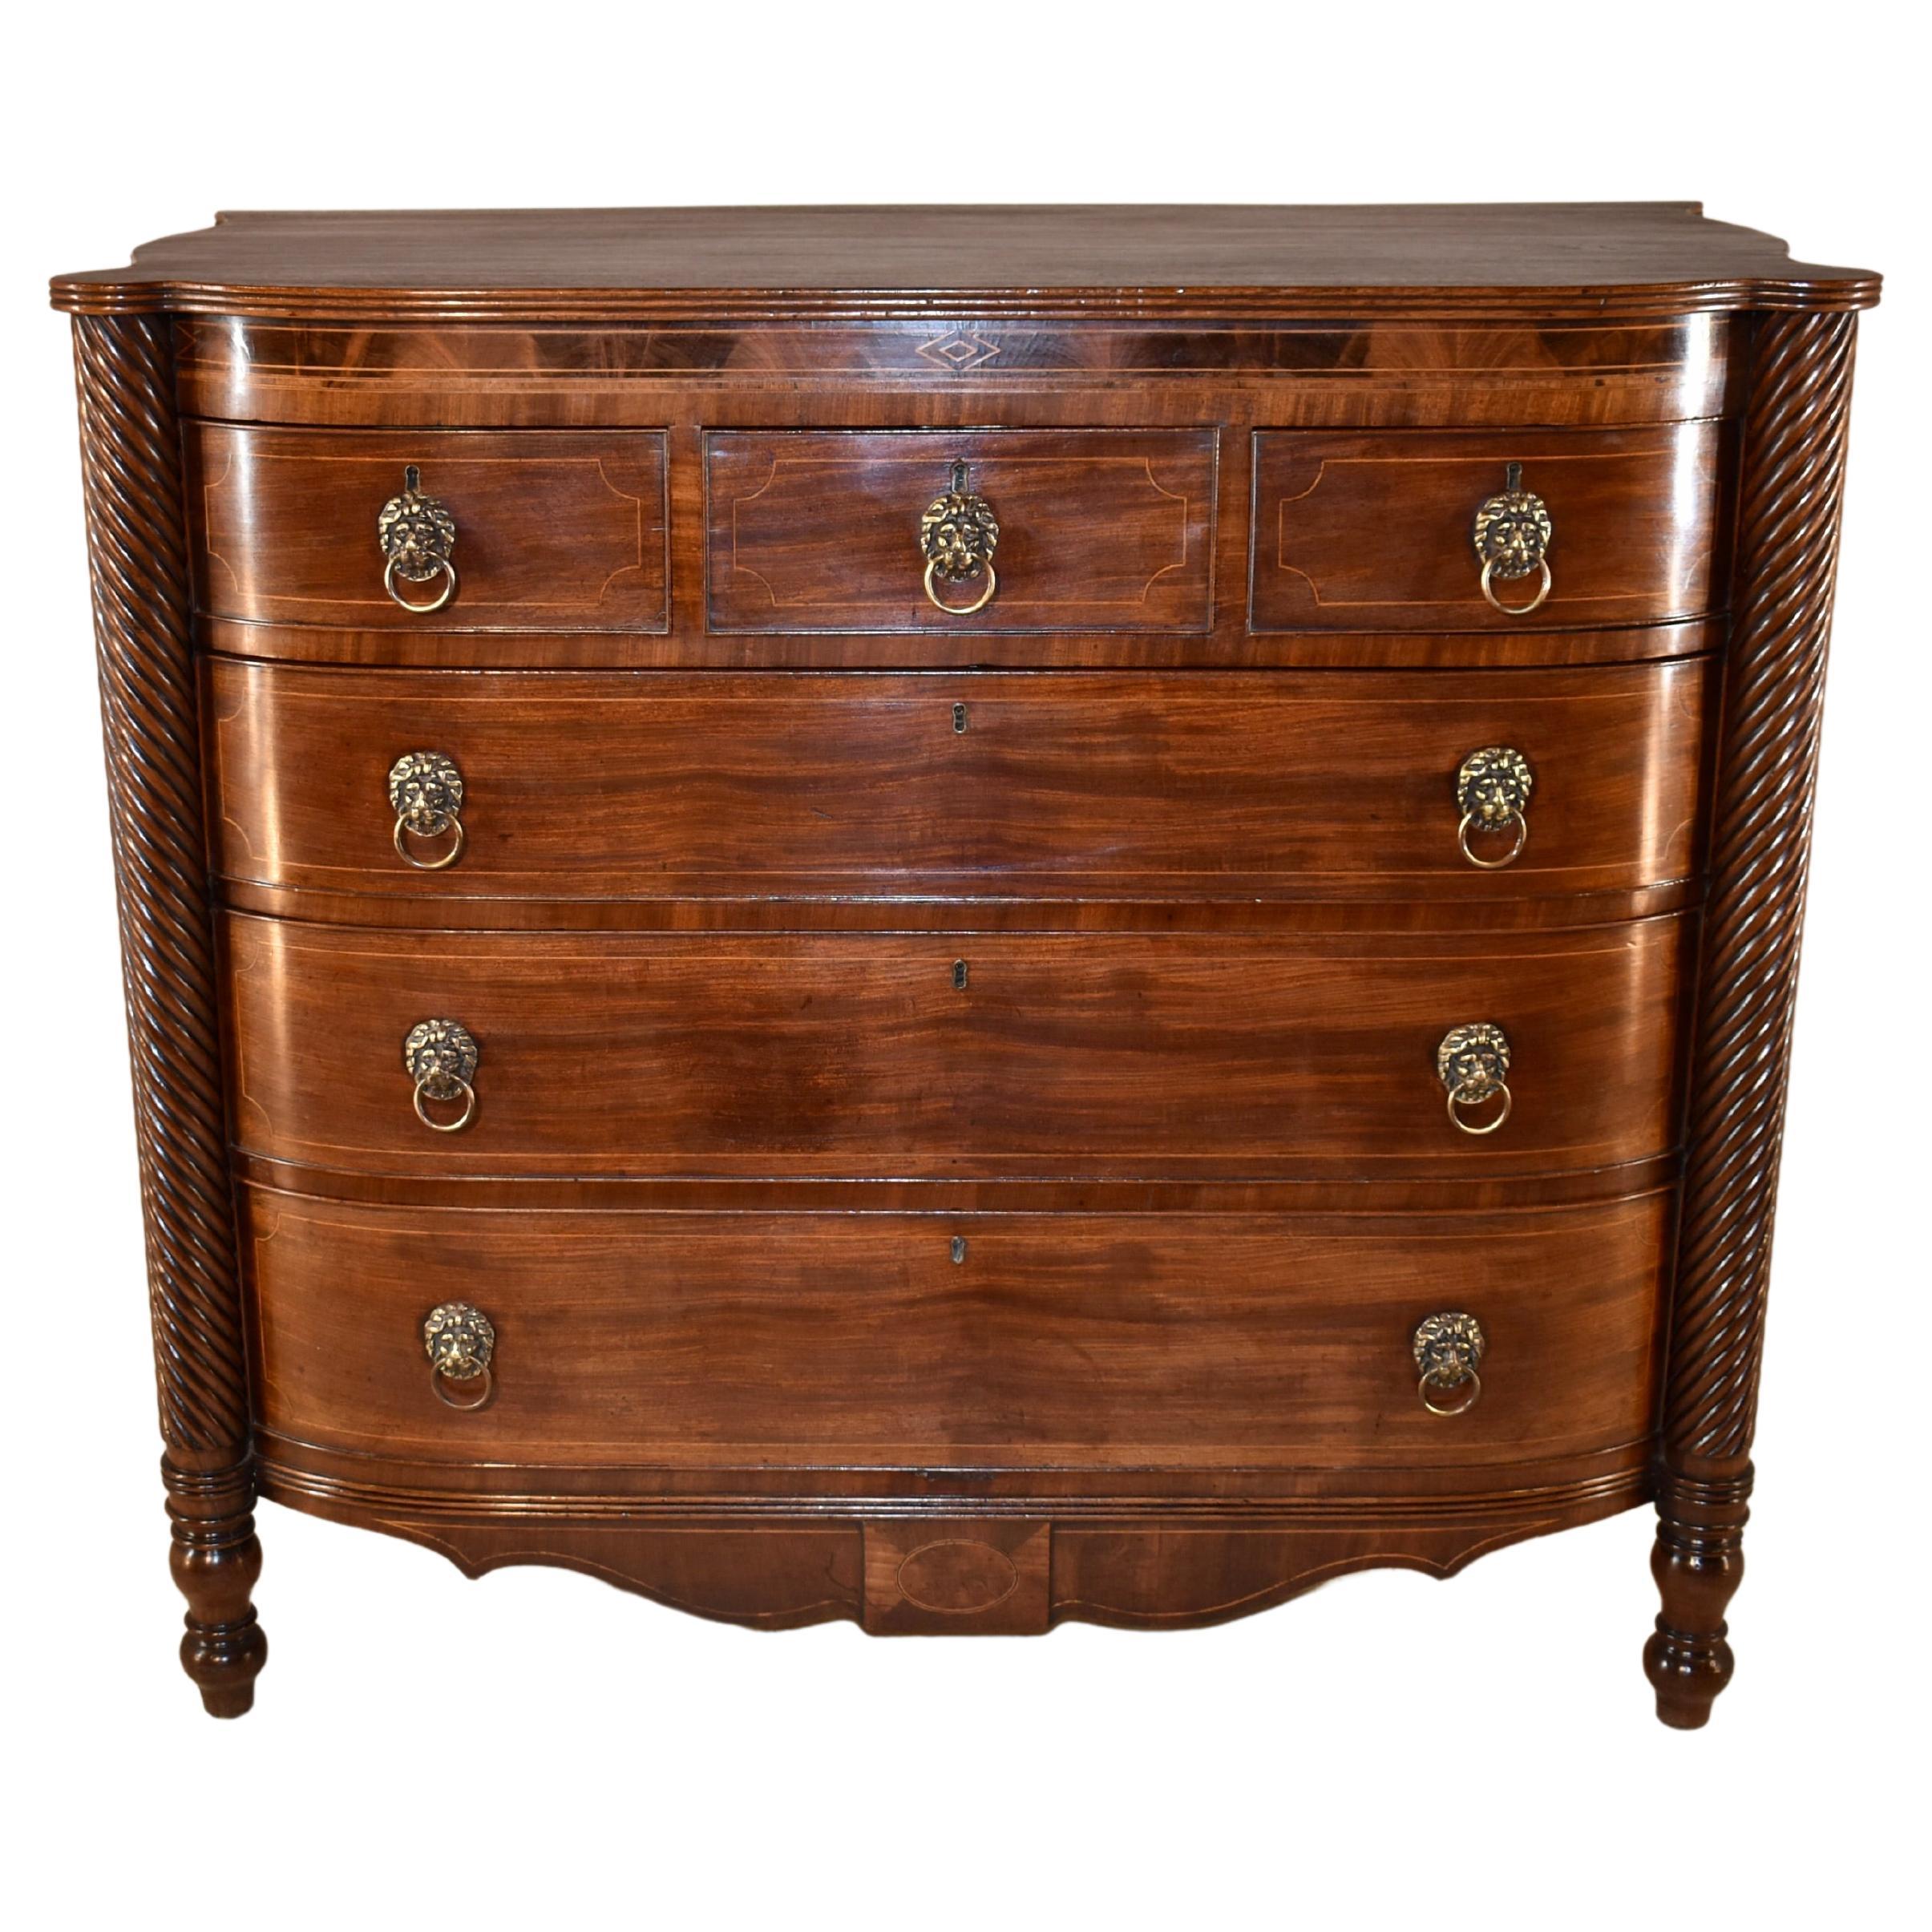 Early 19th Century English Bow Front Chest of Drawers For Sale